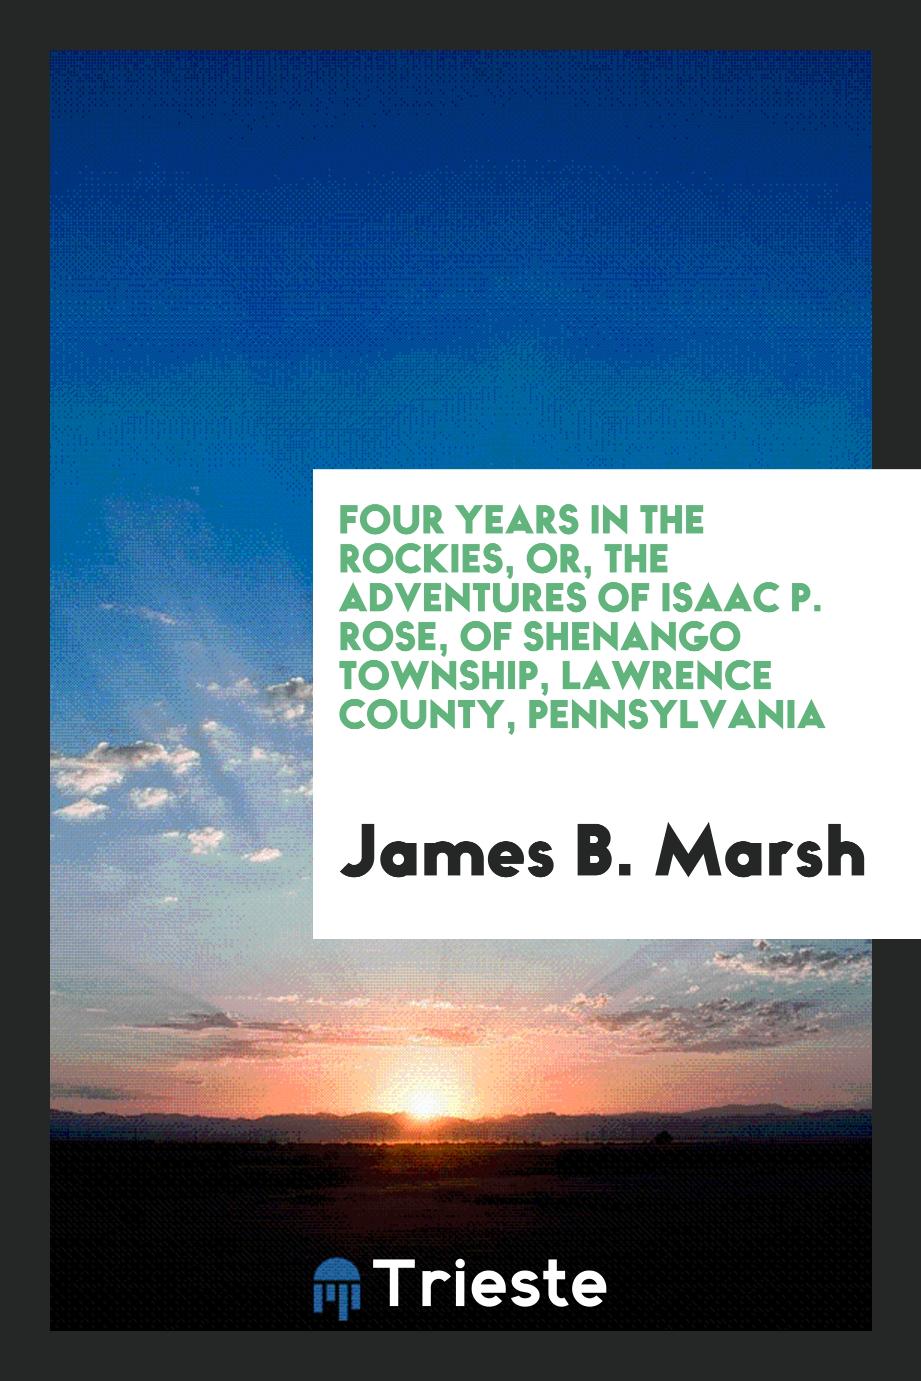 Four years in the Rockies, or, The adventures of Isaac P. Rose, of Shenango township, Lawrence county, Pennsylvania